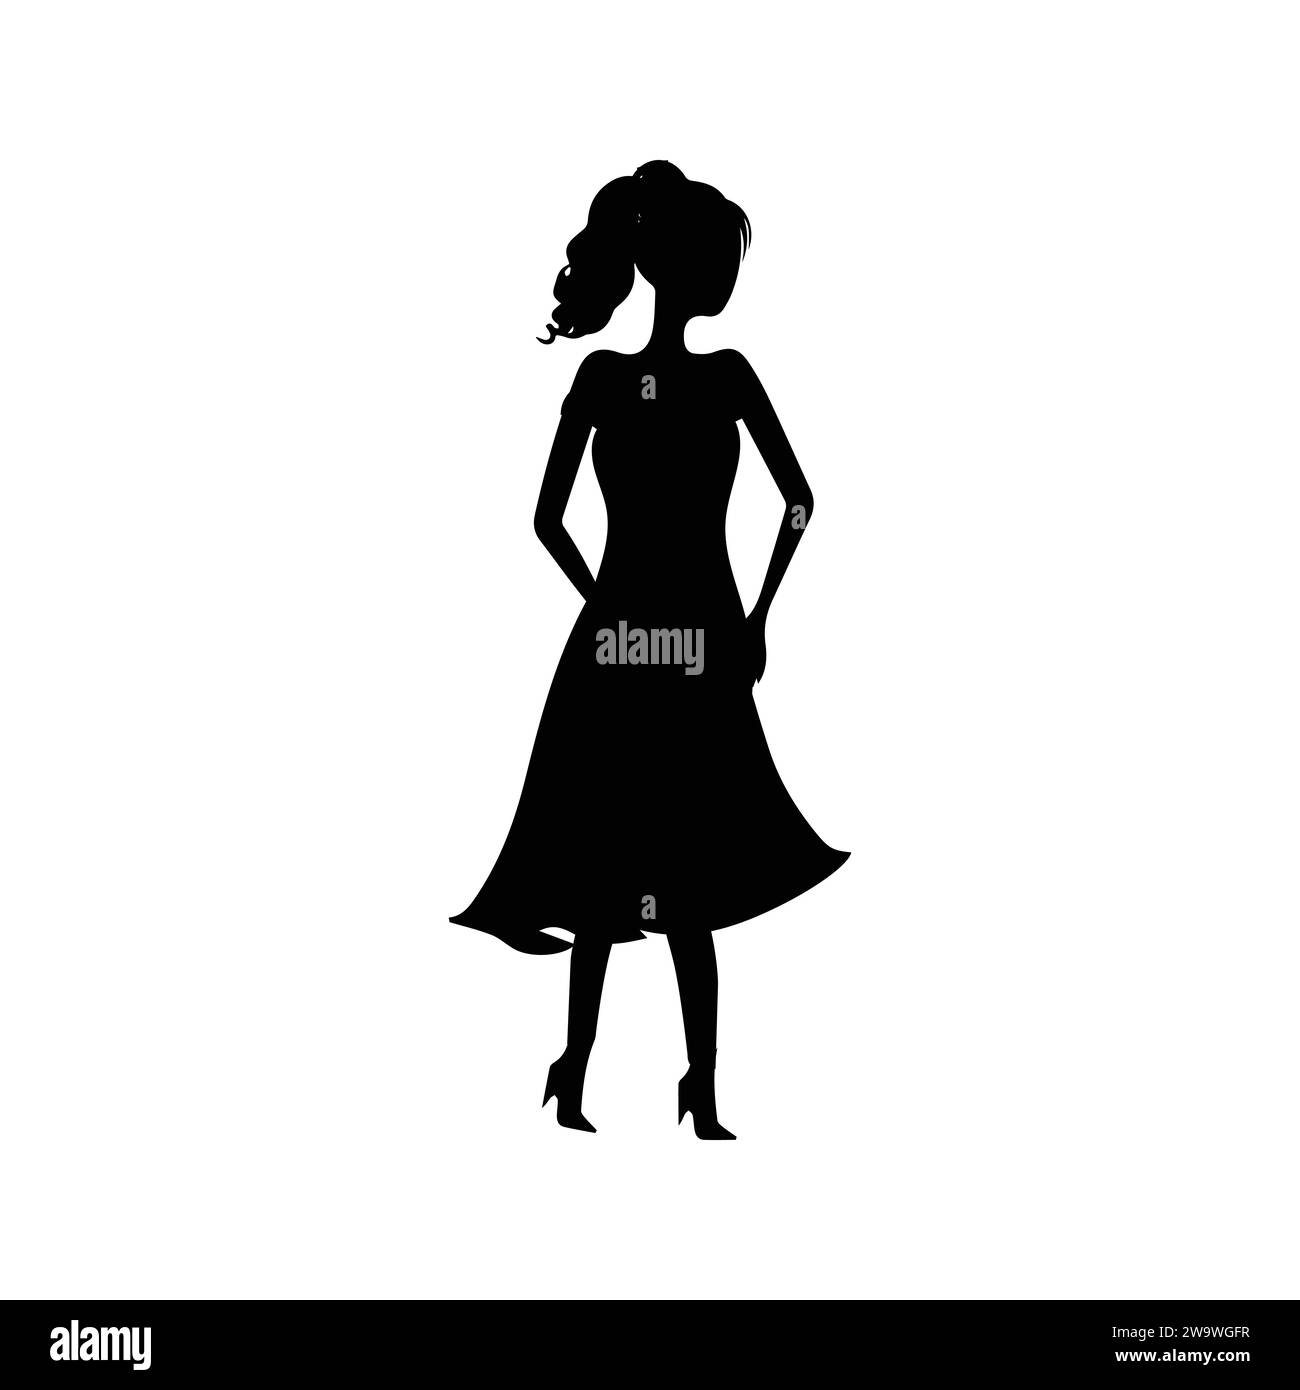 Man, Woman and kids standing silhouette. Group in formal dress. Shillouette romantic couple picture. Silhouettes of People. Stock Vector